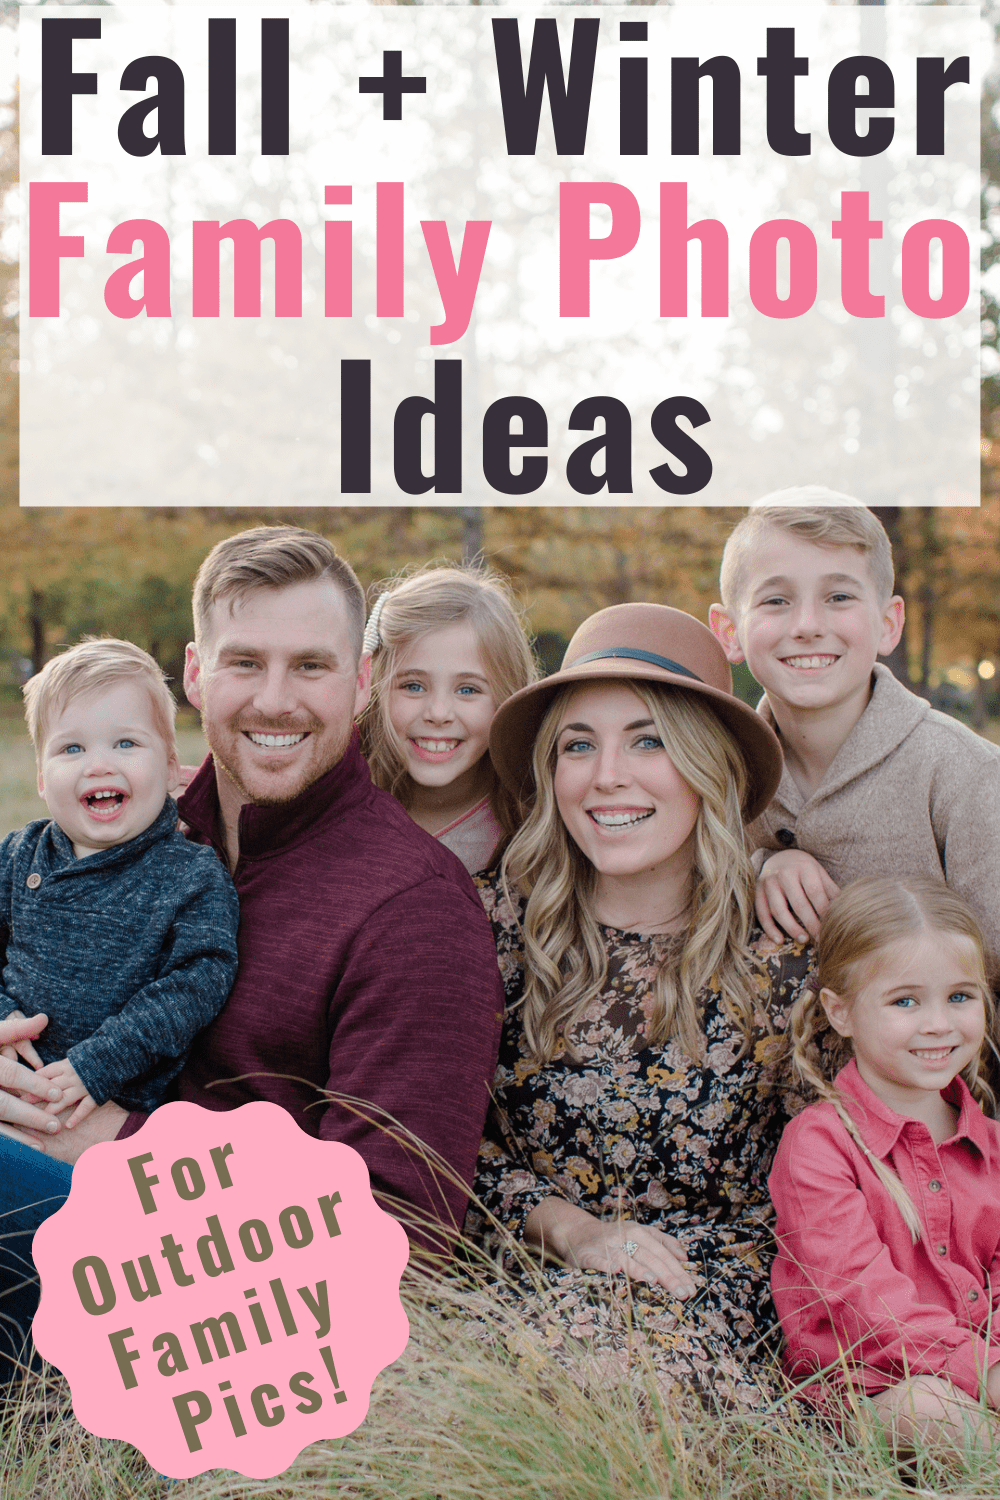 Looking for the best family picture ideas outside for the fall and winter season? Here's how to get the best shots during the colder months!